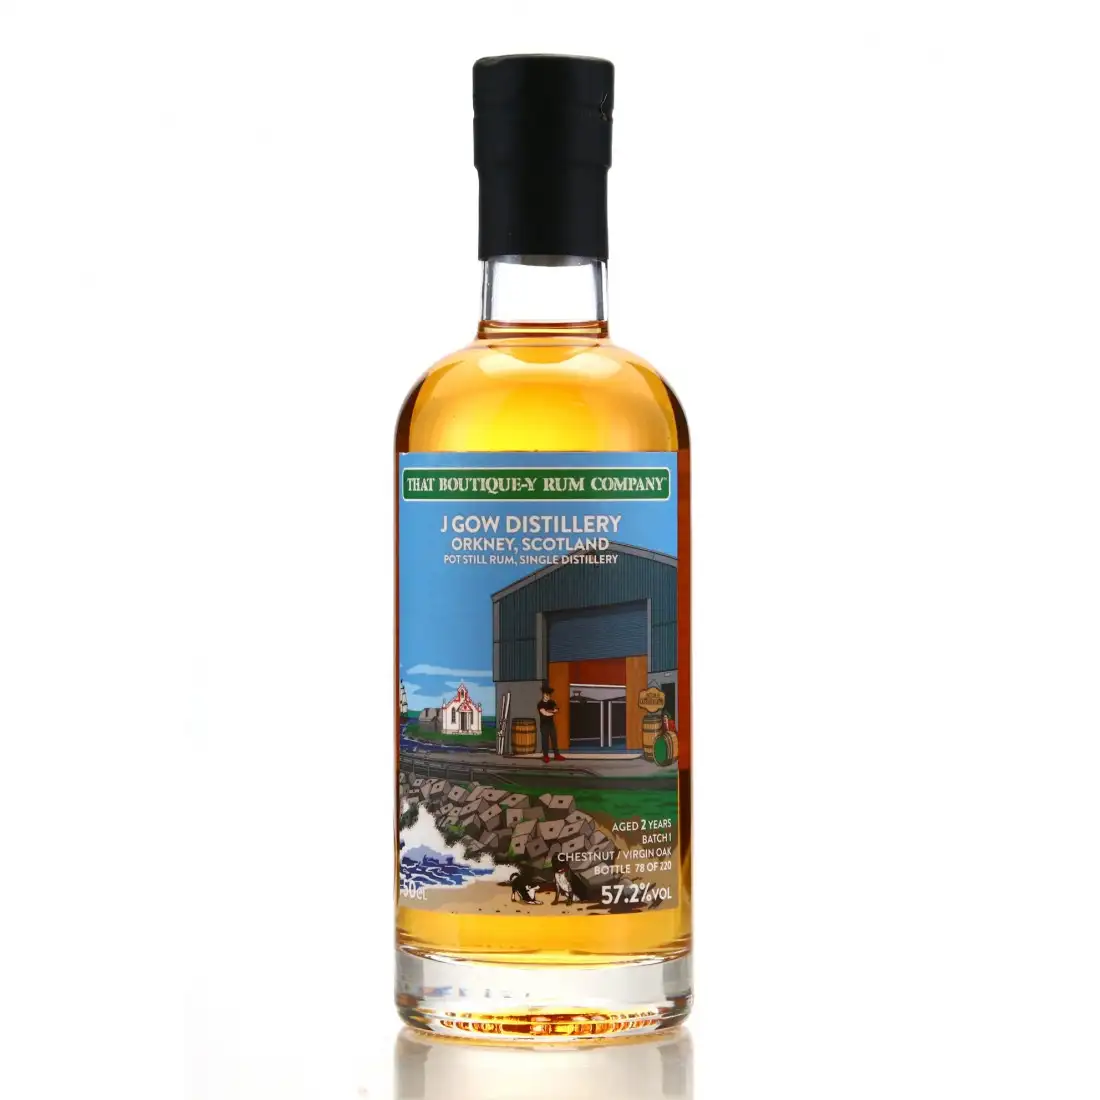 Image of the front of the bottle of the rum J. Gow Distillery